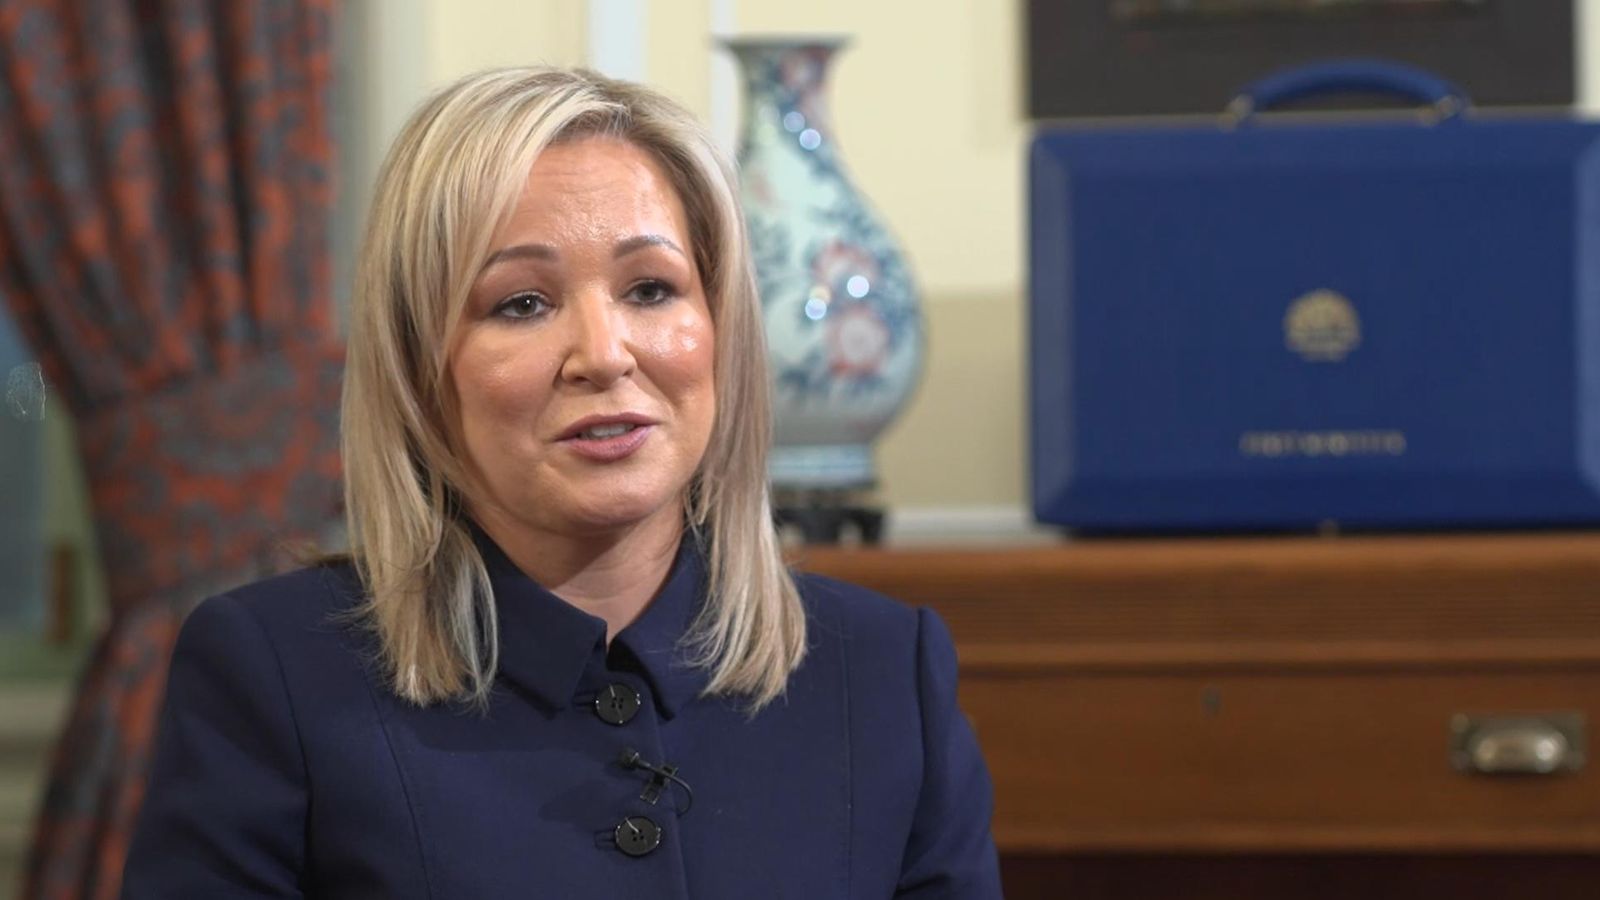 Northern Ireland's new first minister Michelle O'Neill 'contests' claim Irish unity is 'decades' away